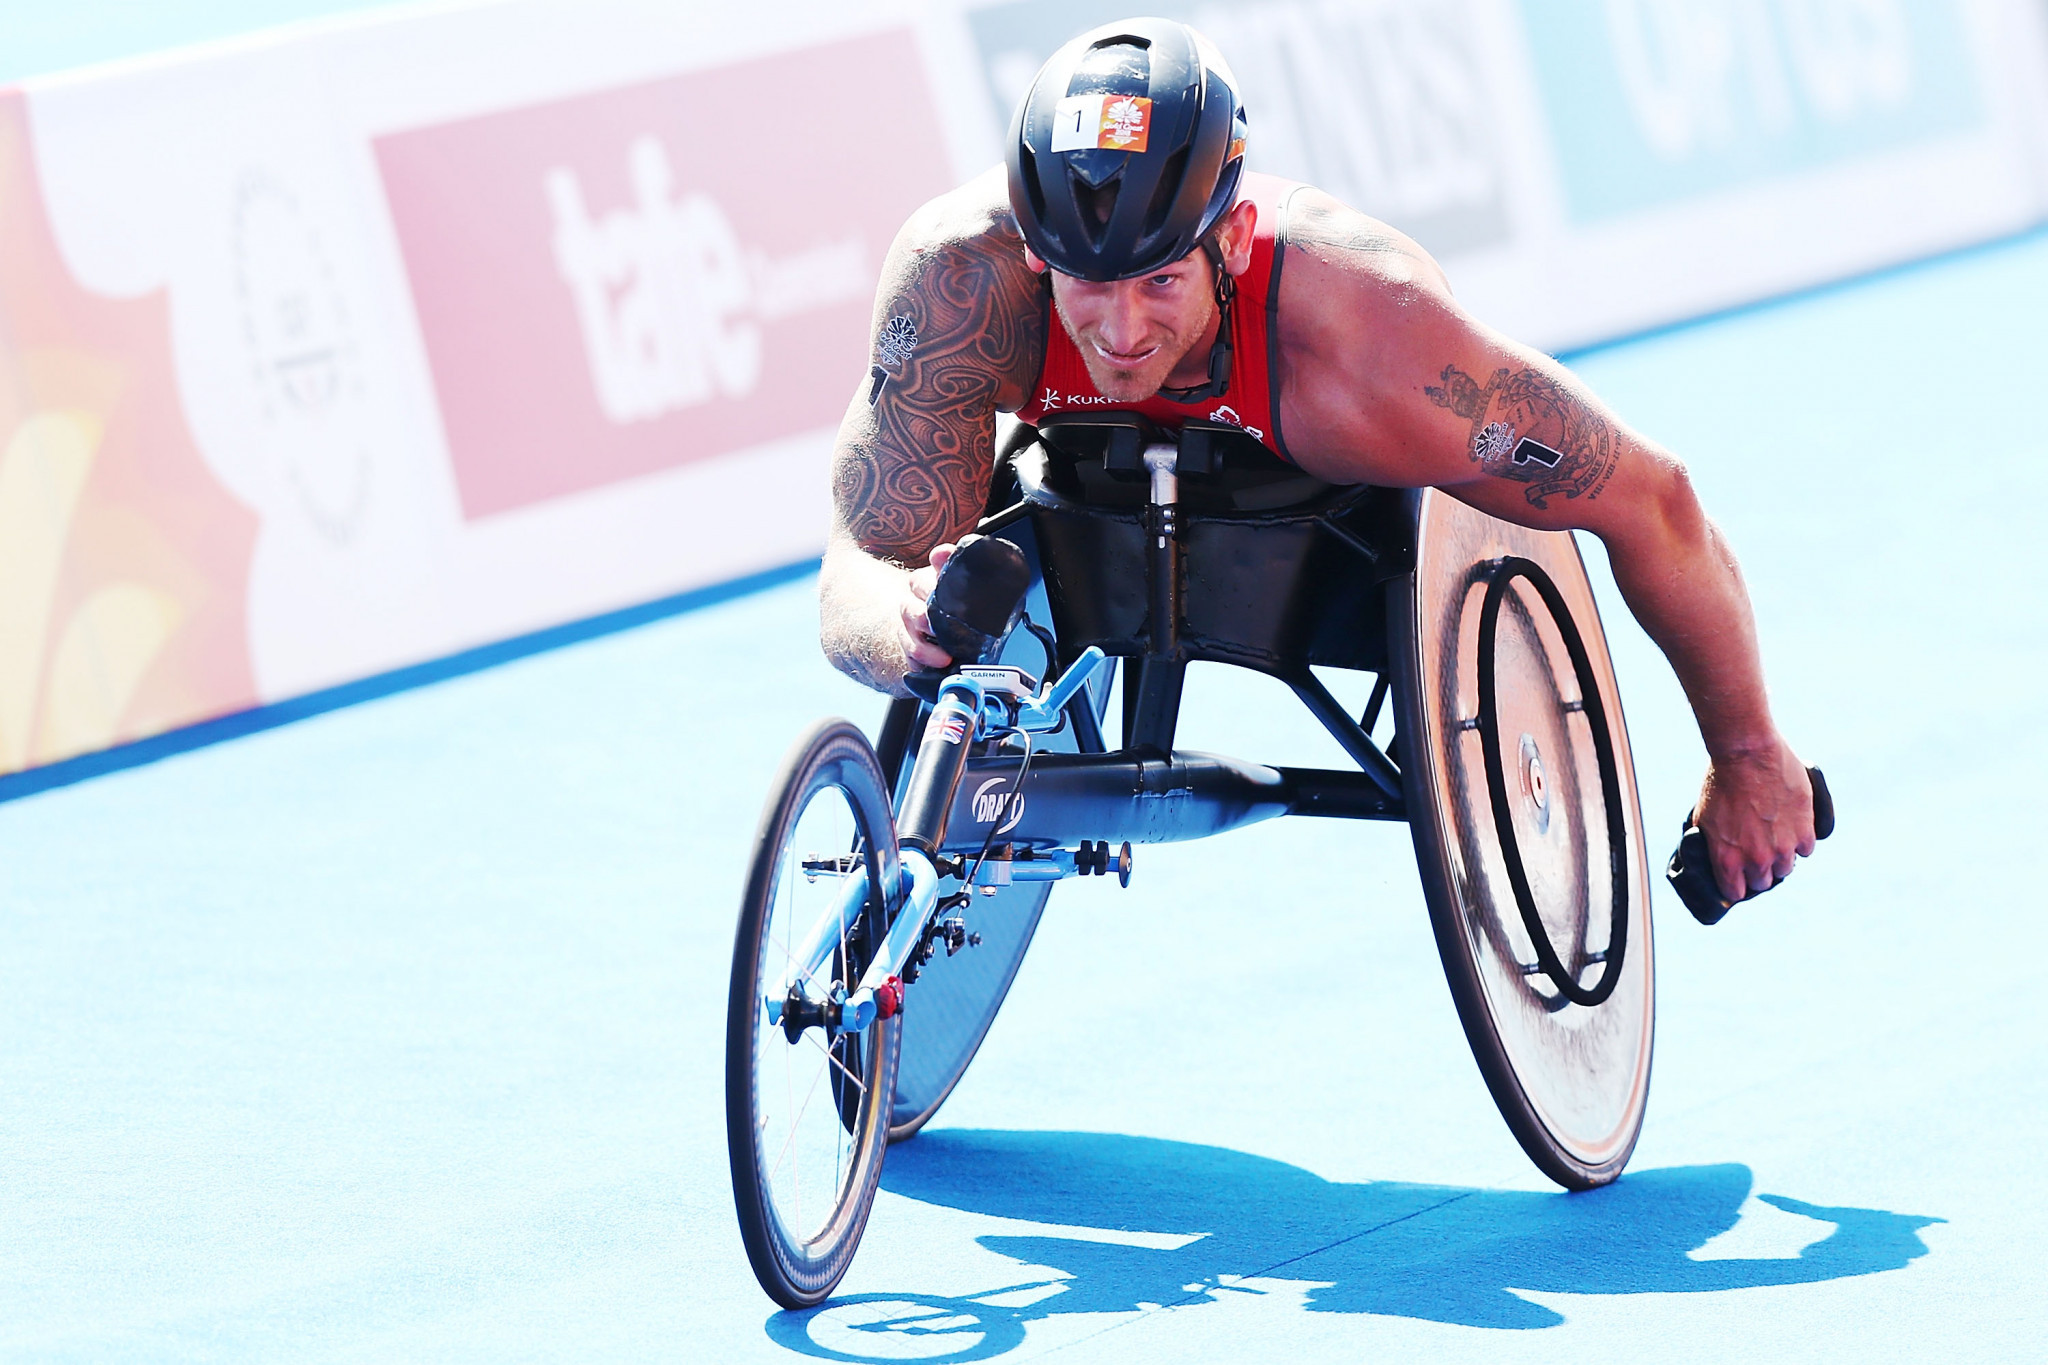 Joseph Townsend helped England to a double success as Para-triathlon made its debut on the Commonwealth Games programme ©Getty Images